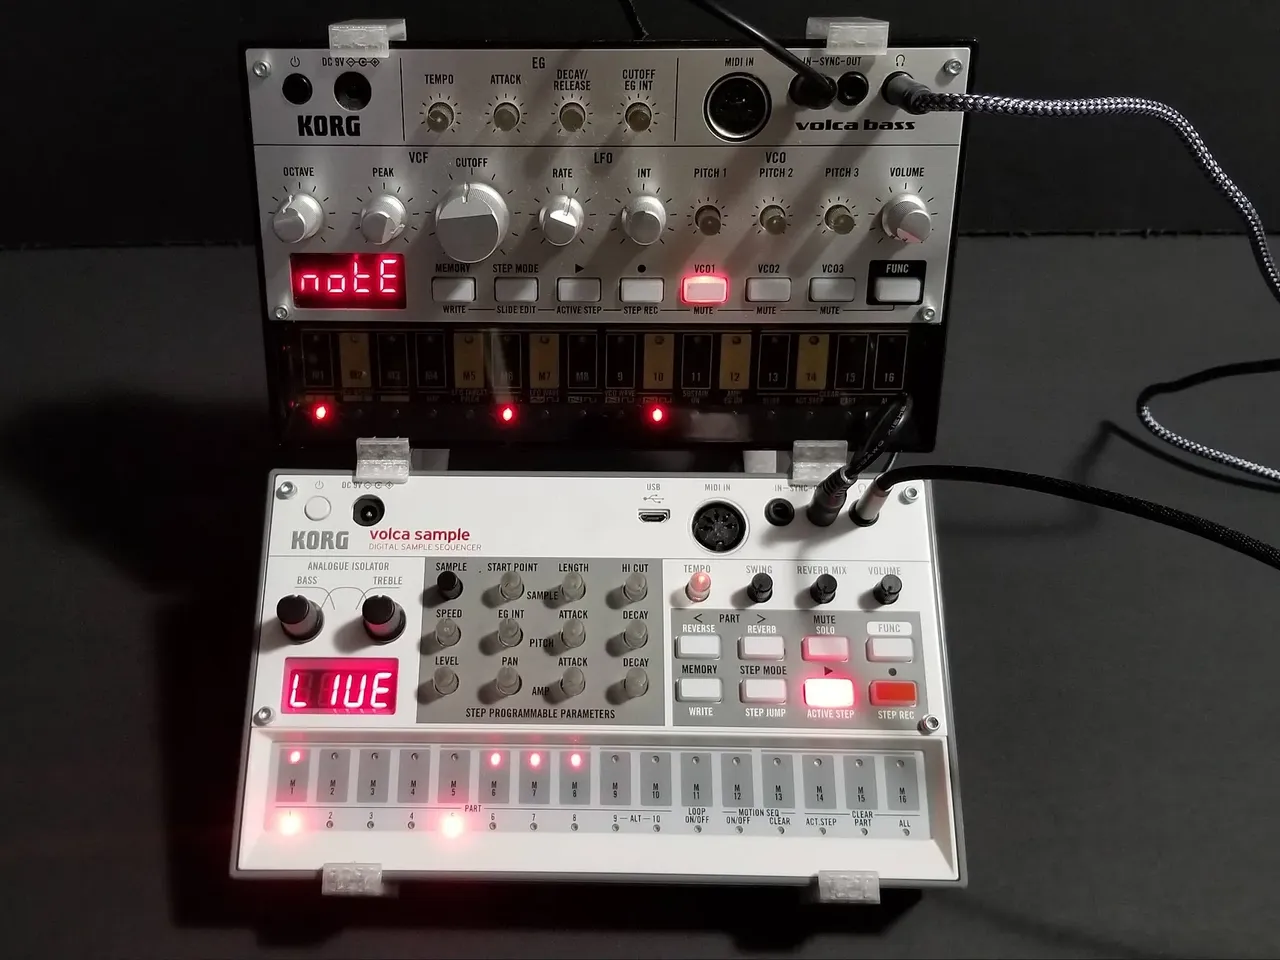 PRECISION RANGE DUAL KORG VOLCA STAND RECESSED FOR LIVE PERFORMANCE 